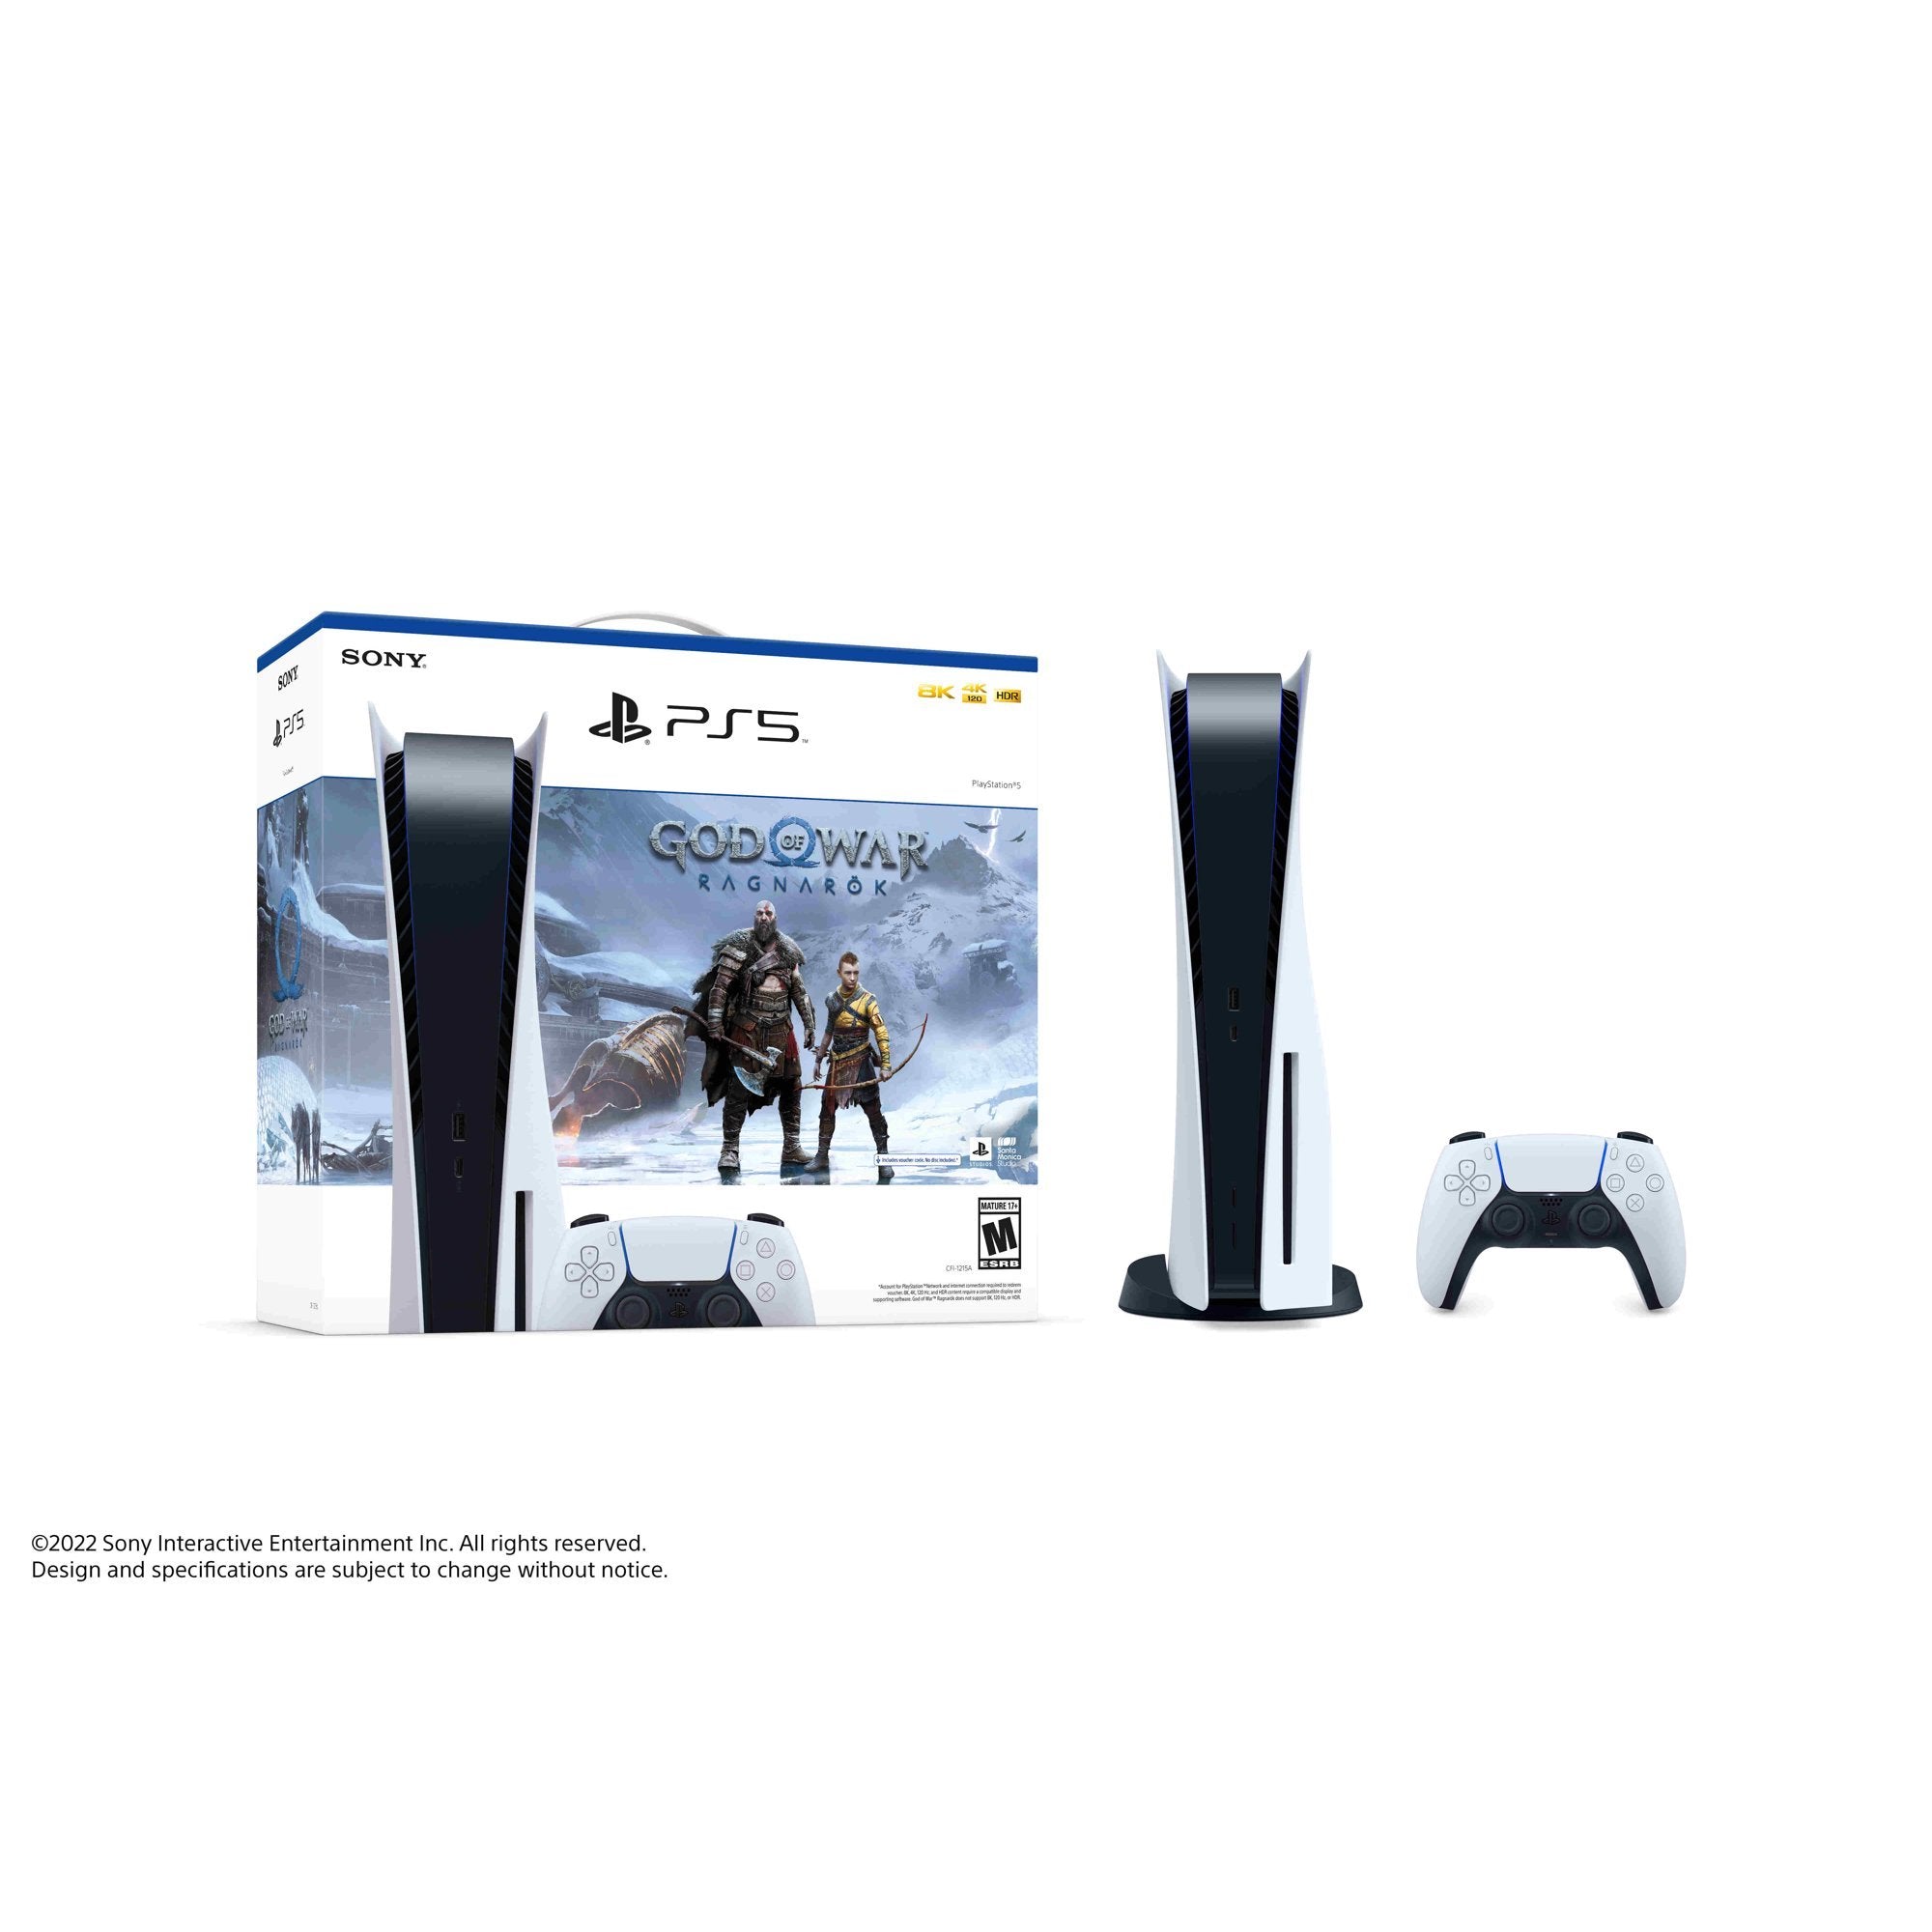 PlayStation 5 Disc Edition God of War Ragnarok Bundle with Two Controllers White and Cosmic Red DualSense and Mytrix Dual Controller Charger